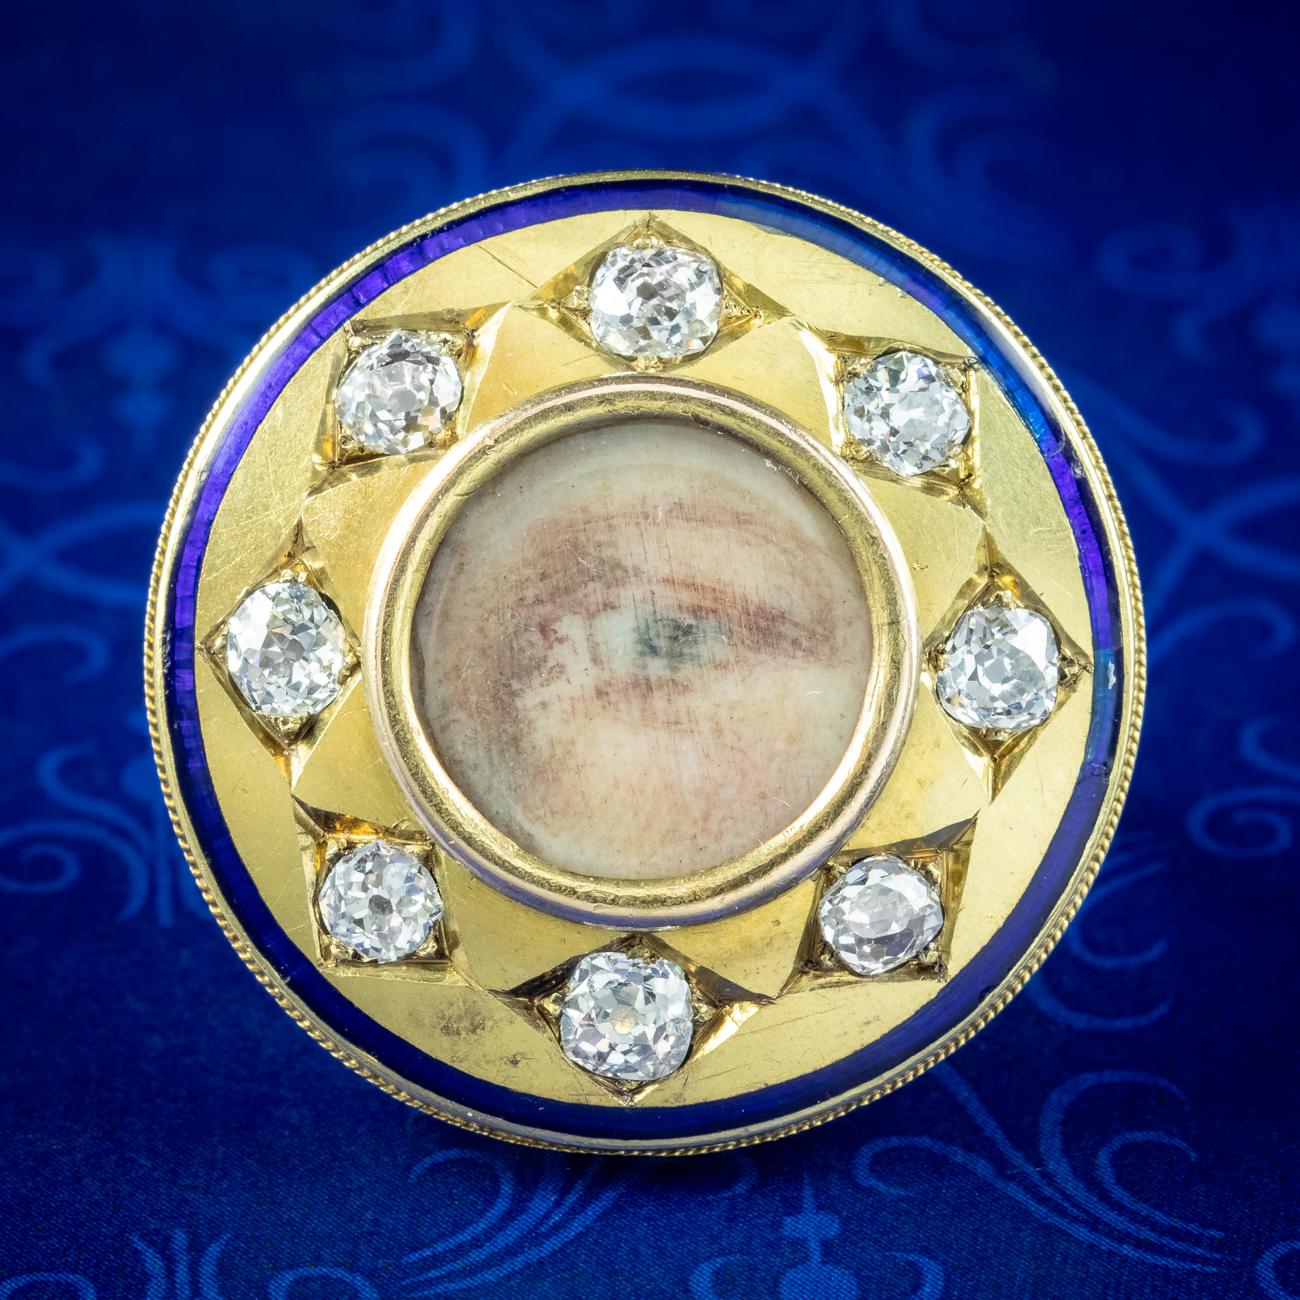 Here we have an incredibly rare antique Georgian ring featuring a detailed eye miniature in the centre hand painted by none other than Sir Edwin Henry Landseer, a renowned British artist who created a wide range of paintings and sculptures over the